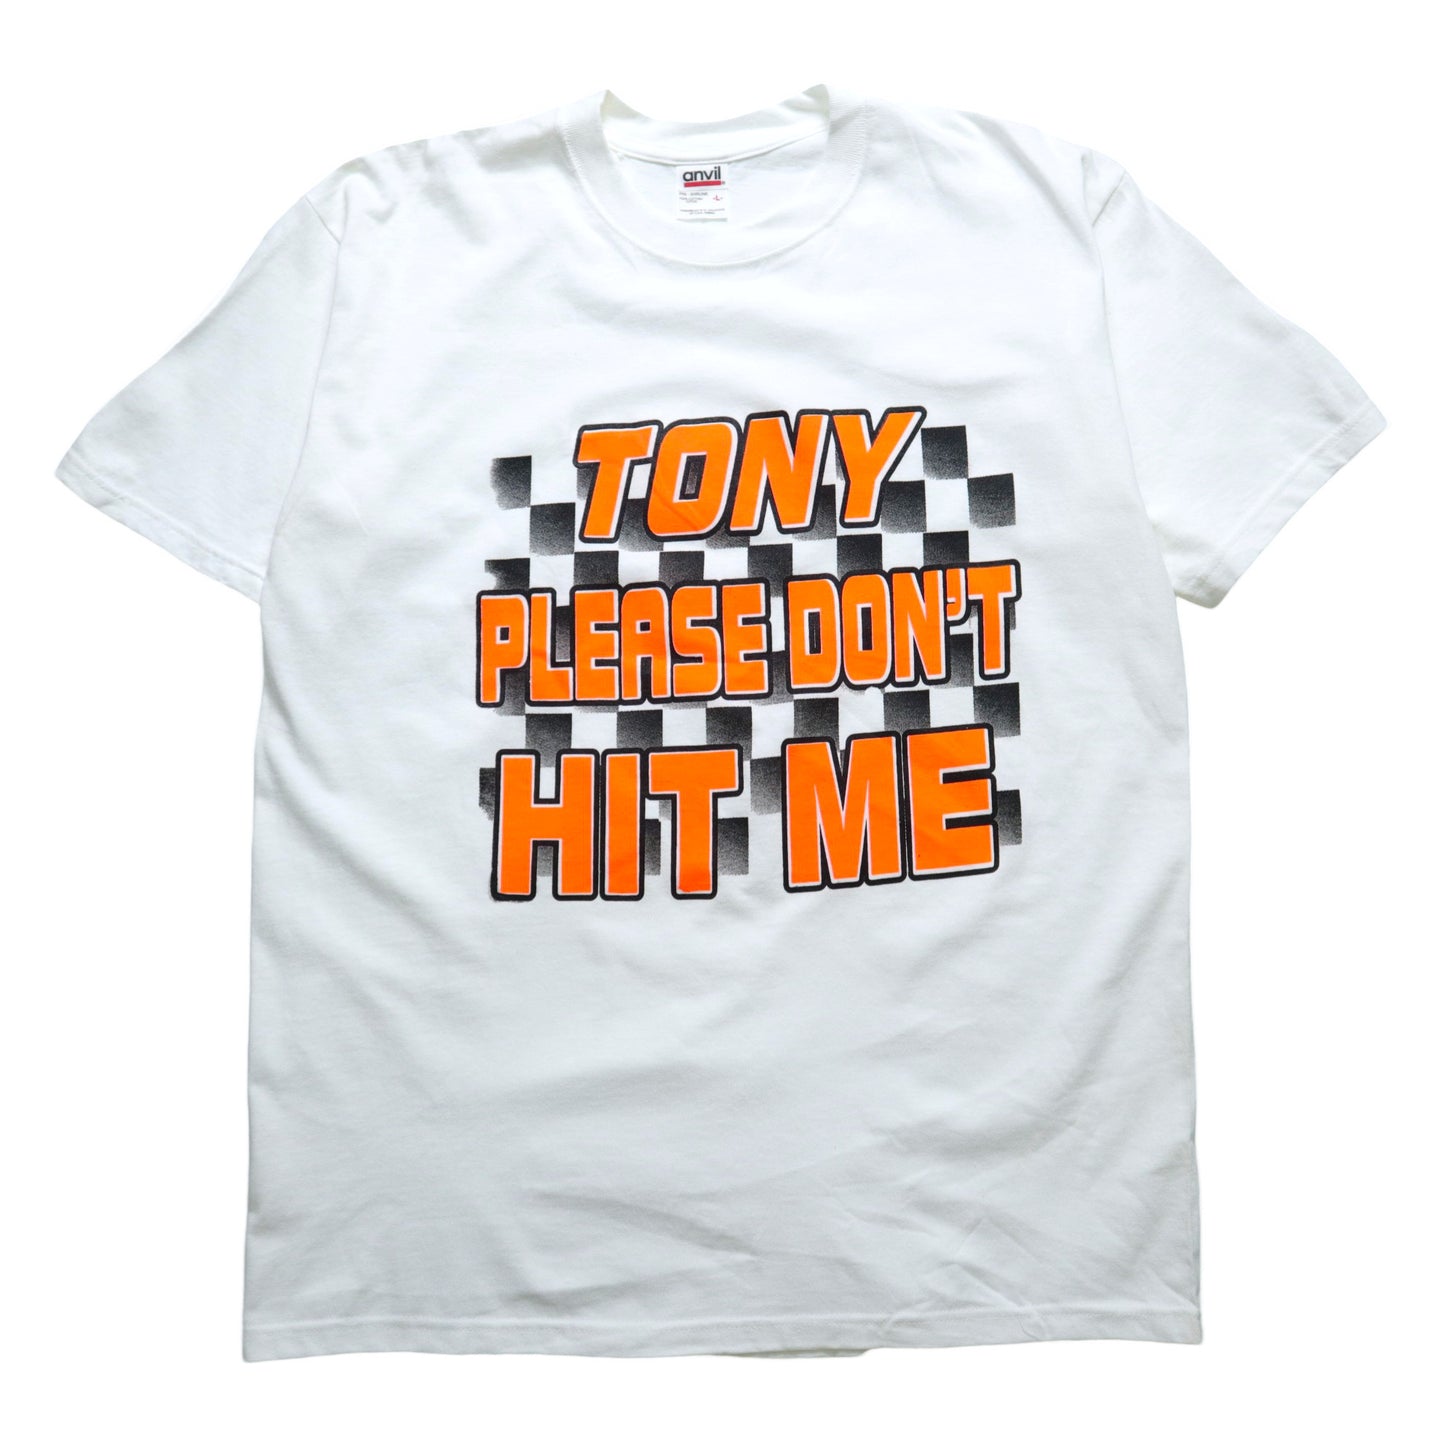 ANVIL Please don't hit me 3D ラバー レーシング プリント T シャツ